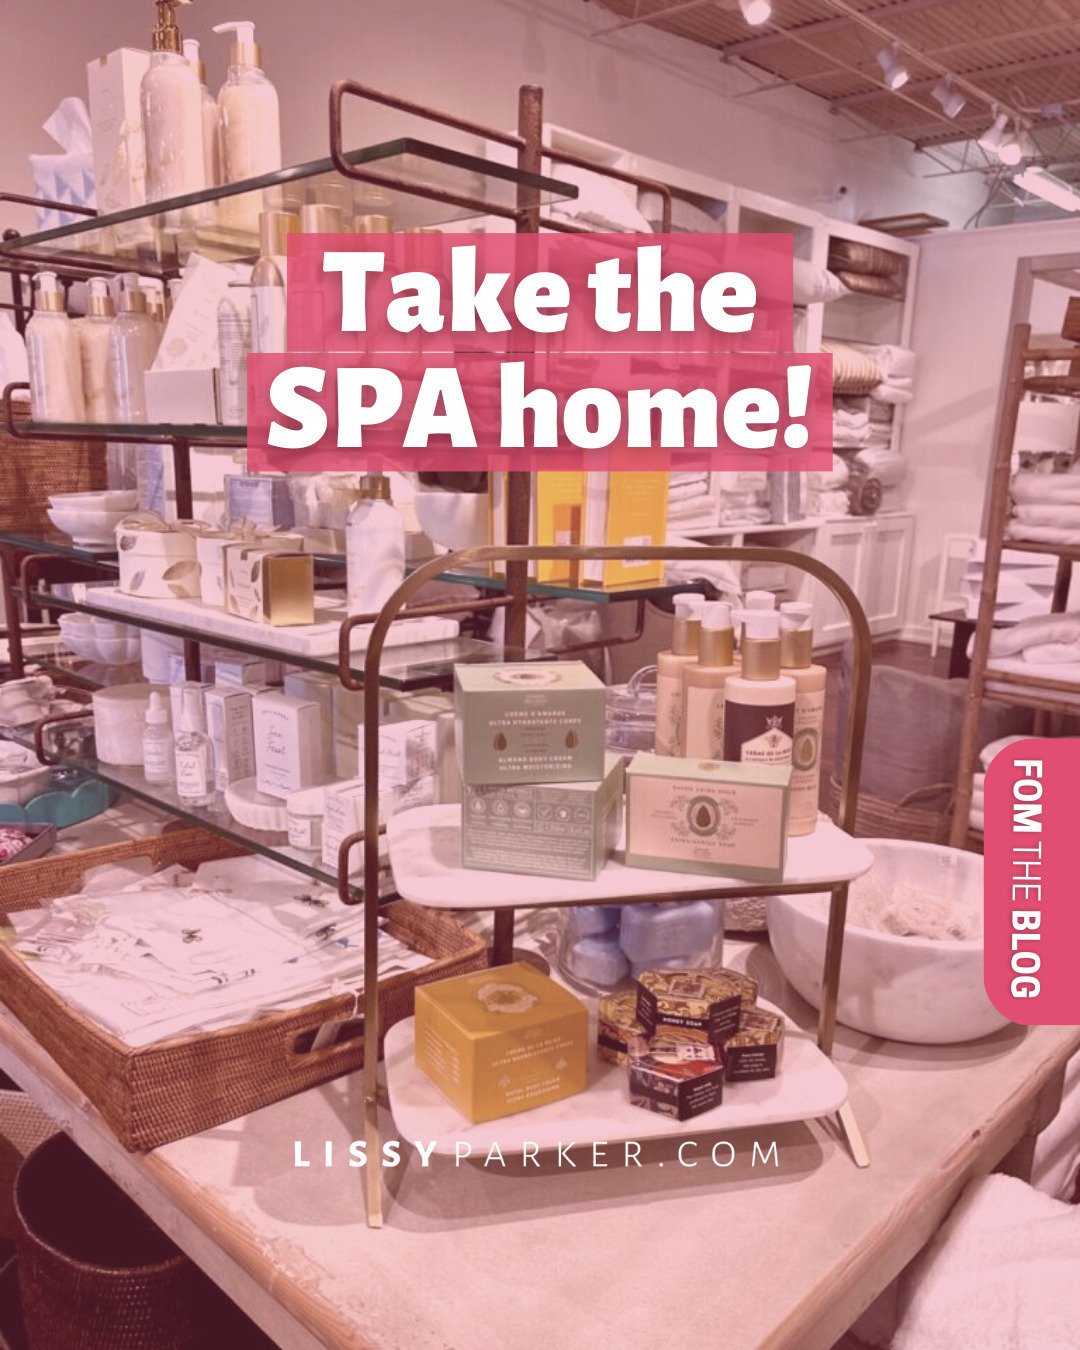 Take some time for yourself today. It&rsquo;s the season for refreshing&mdash;for all of us. If your schedule won&rsquo;t allow for a spa visit, make your home into your favorite spa. All the goodies today are from Erika Reade in Atlanta. They always